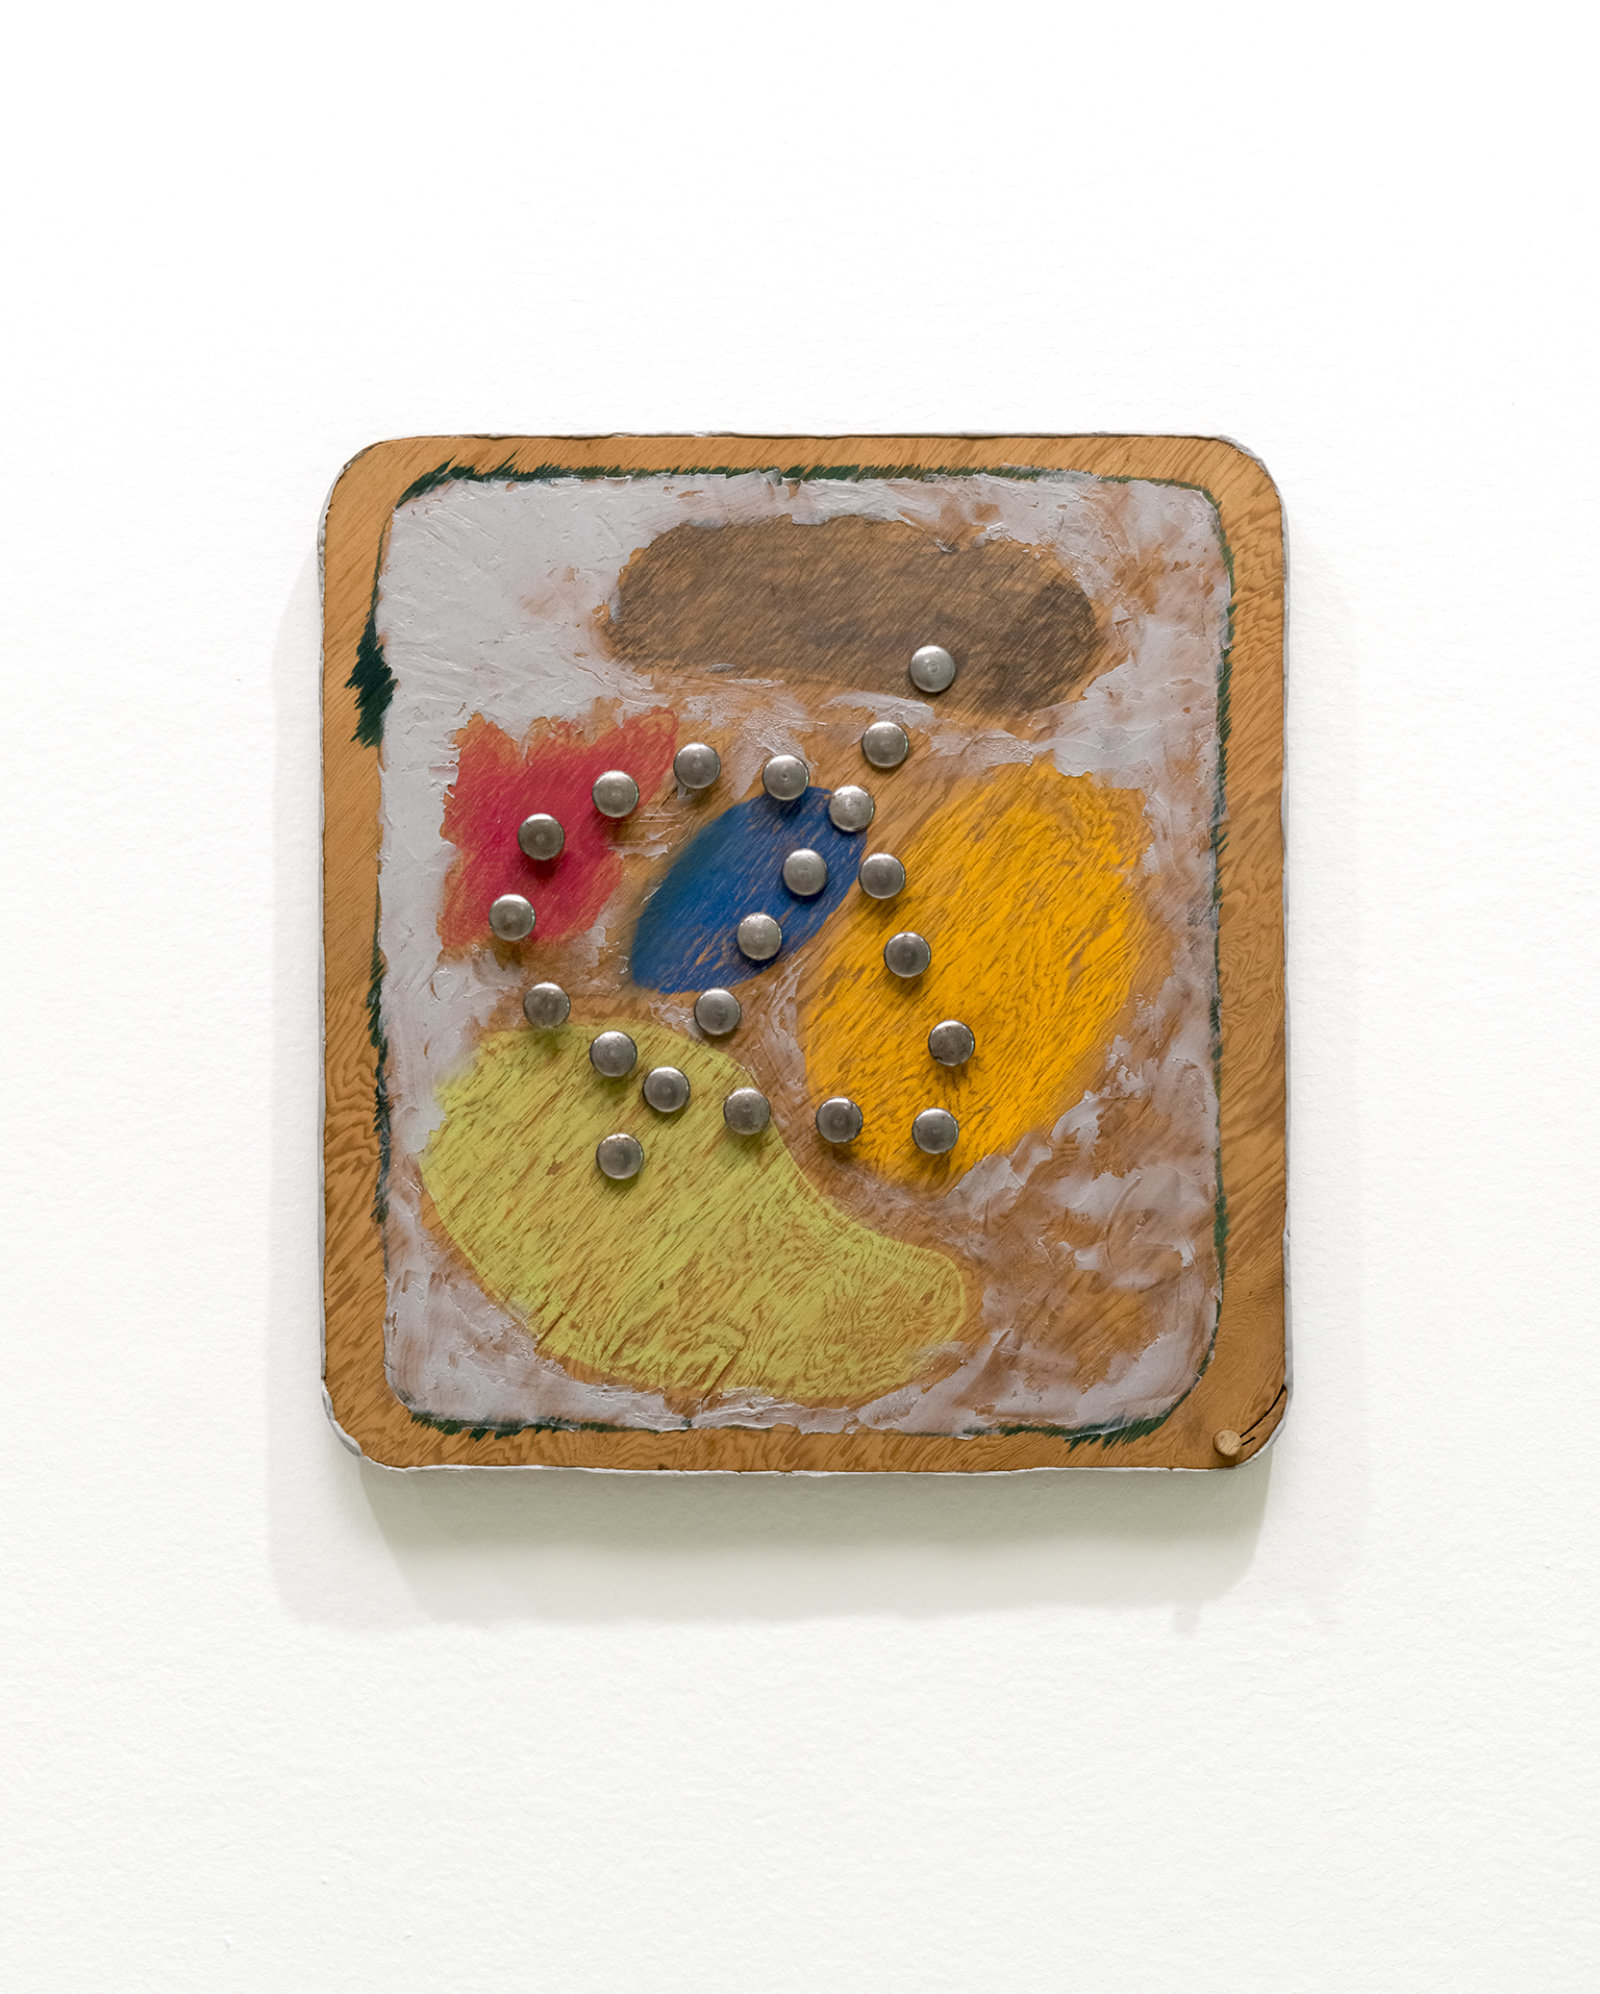 Jerry Pethick, The Still Heart, 1993, wood, metal, paint, silicone, crayon, 15 x 16 x 1 in. (38 x 41 x 3 cm)